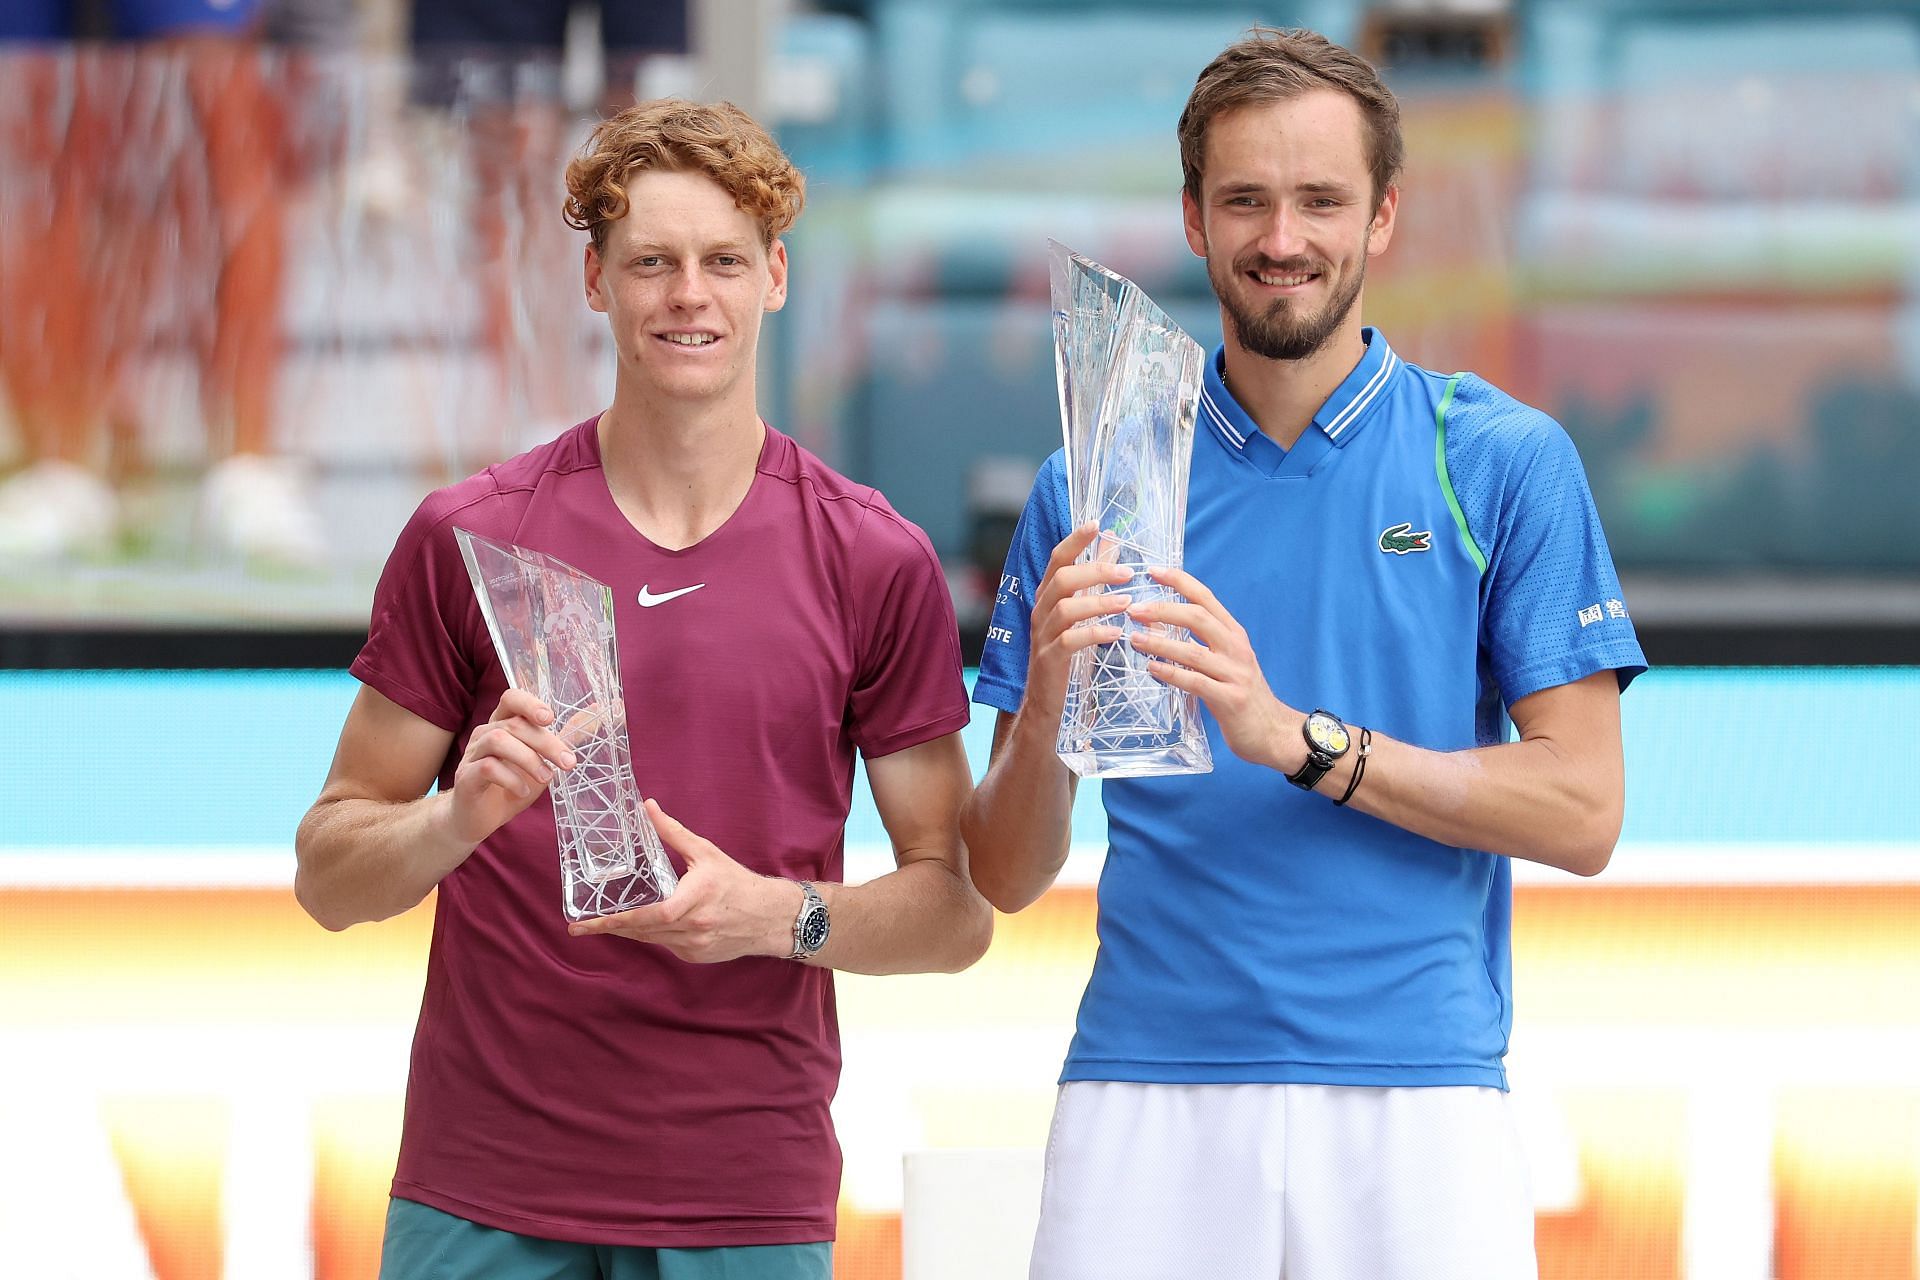 Medvedev, Sinner Make Moves, Earn Chance To Surge On Clay, ATP Tour